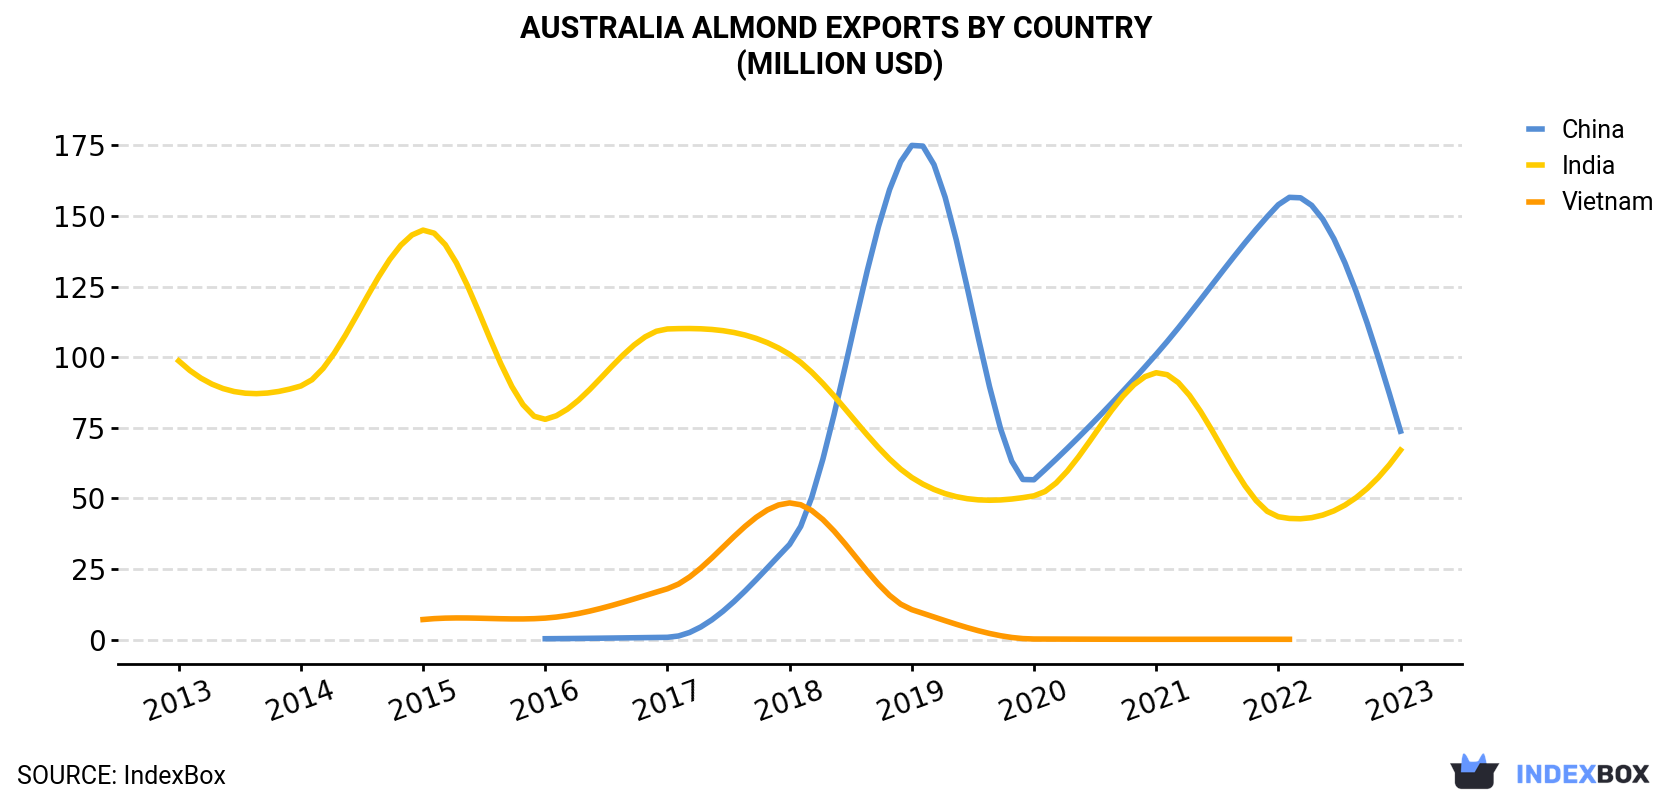 Australia Almond Exports By Country (Million USD)